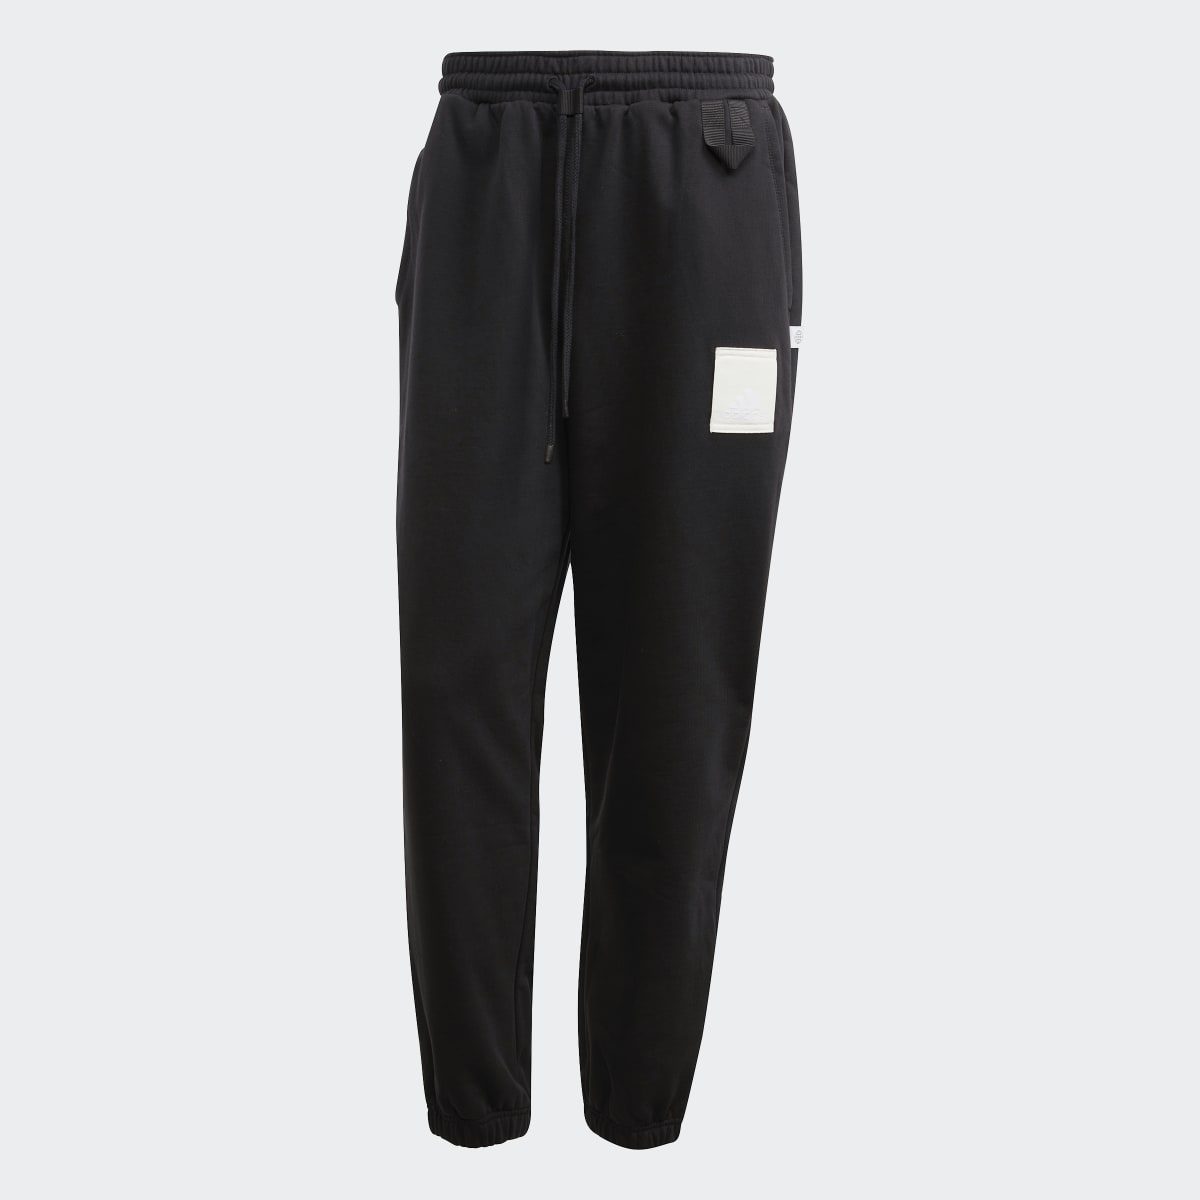 Adidas Lounge Heavy French Terry Pants. 4